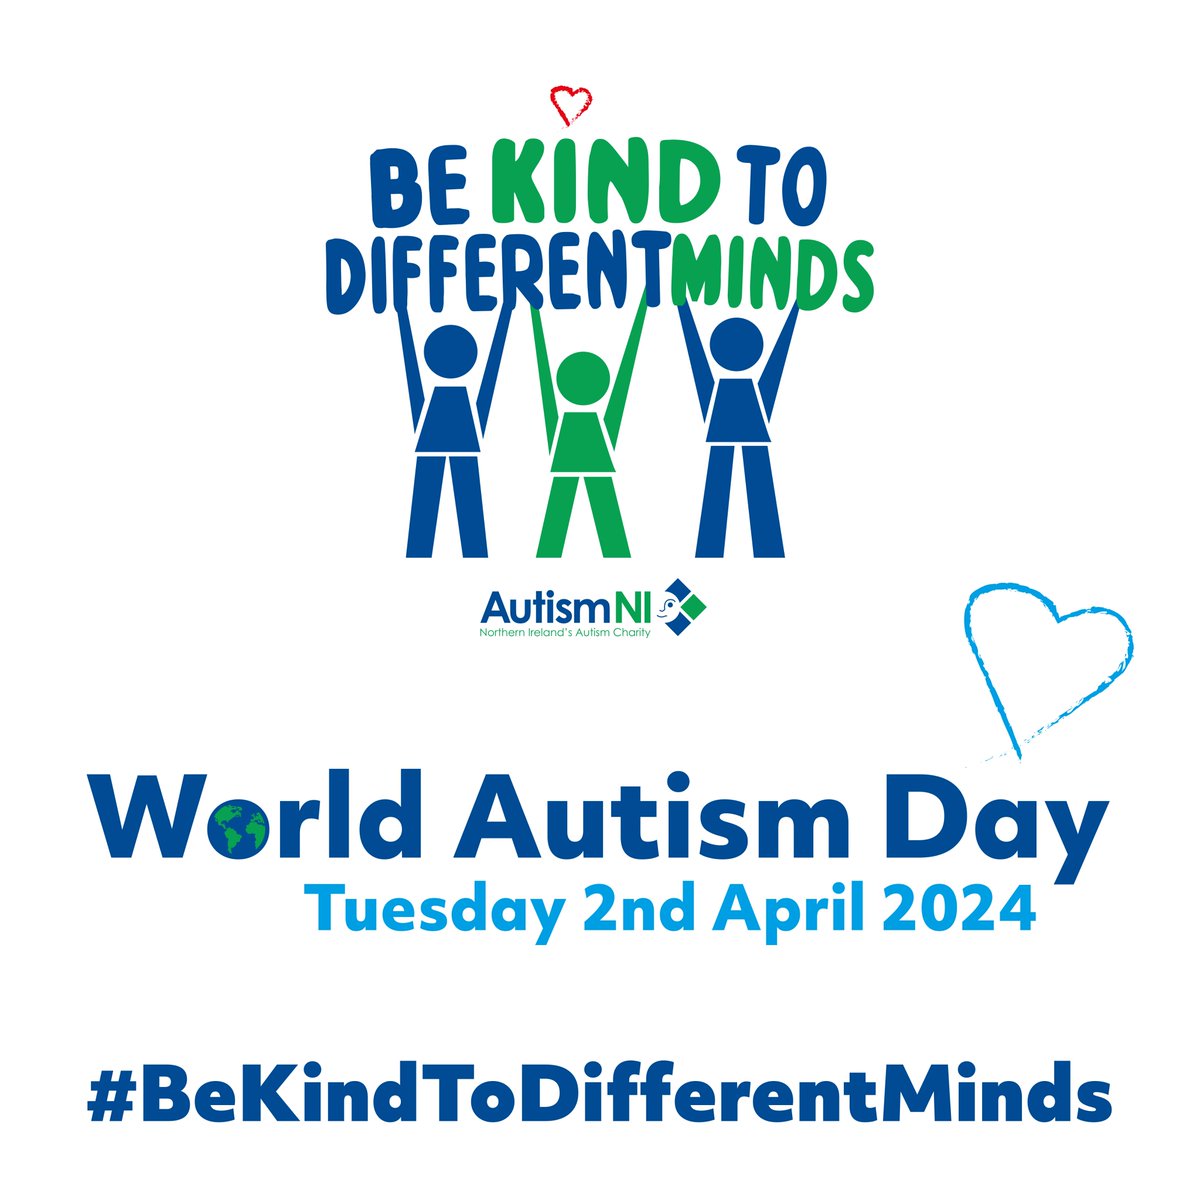 Happy #WorldAutismDay! Today is our day! 💙💚 Help us spread our message 'Be Kind to Different Minds' by saving and sharing our social media graphics. Don't forget to tag us! Save this image or view more at autismni.org/autism-accepta… #WAAW #autismsupport #inclusionmatters